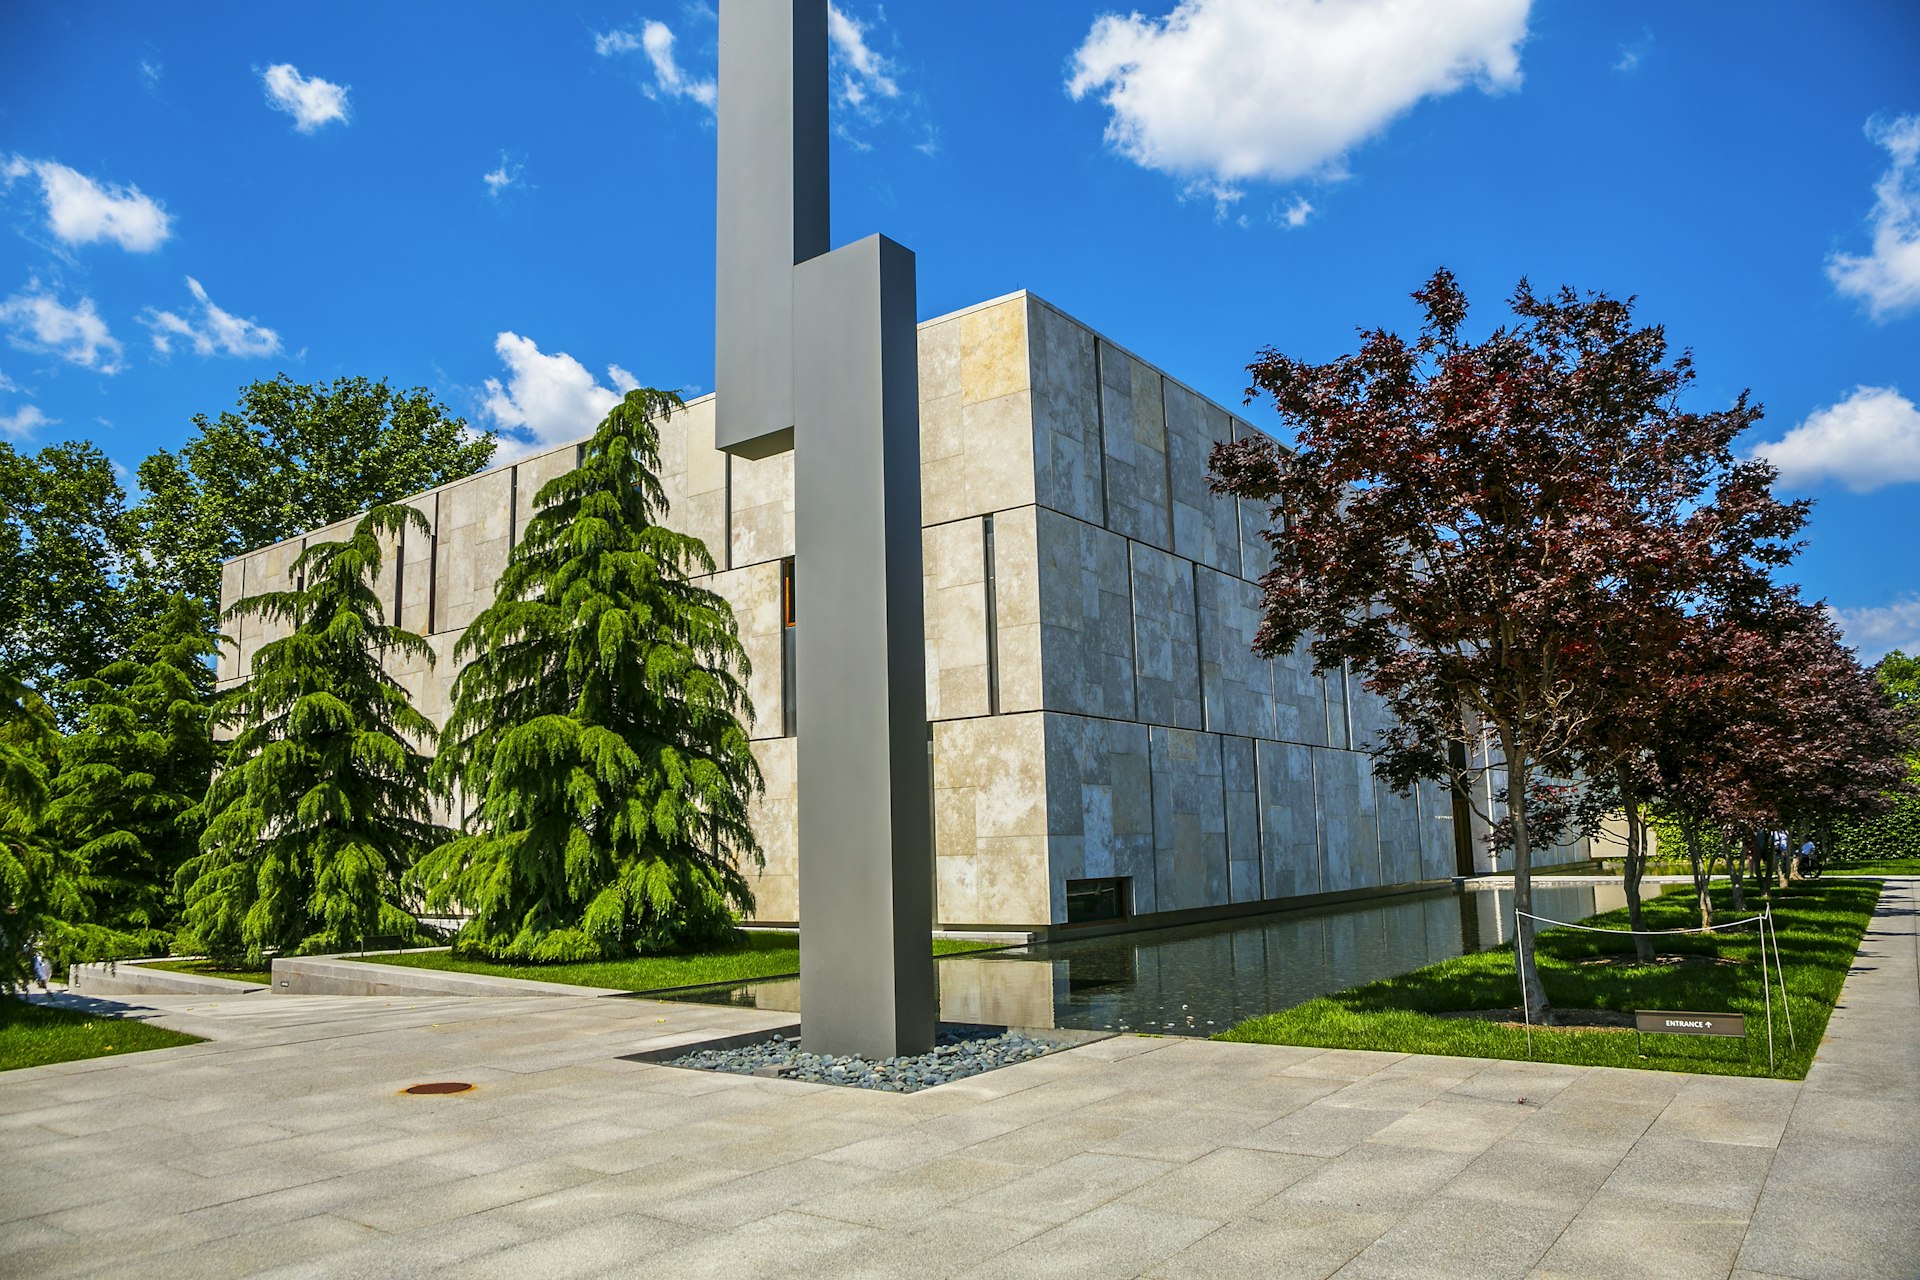 Exterior of The Barnes Foundation at Philadelphia. There's a jagged statute in front and trees surrounding the buildings. 